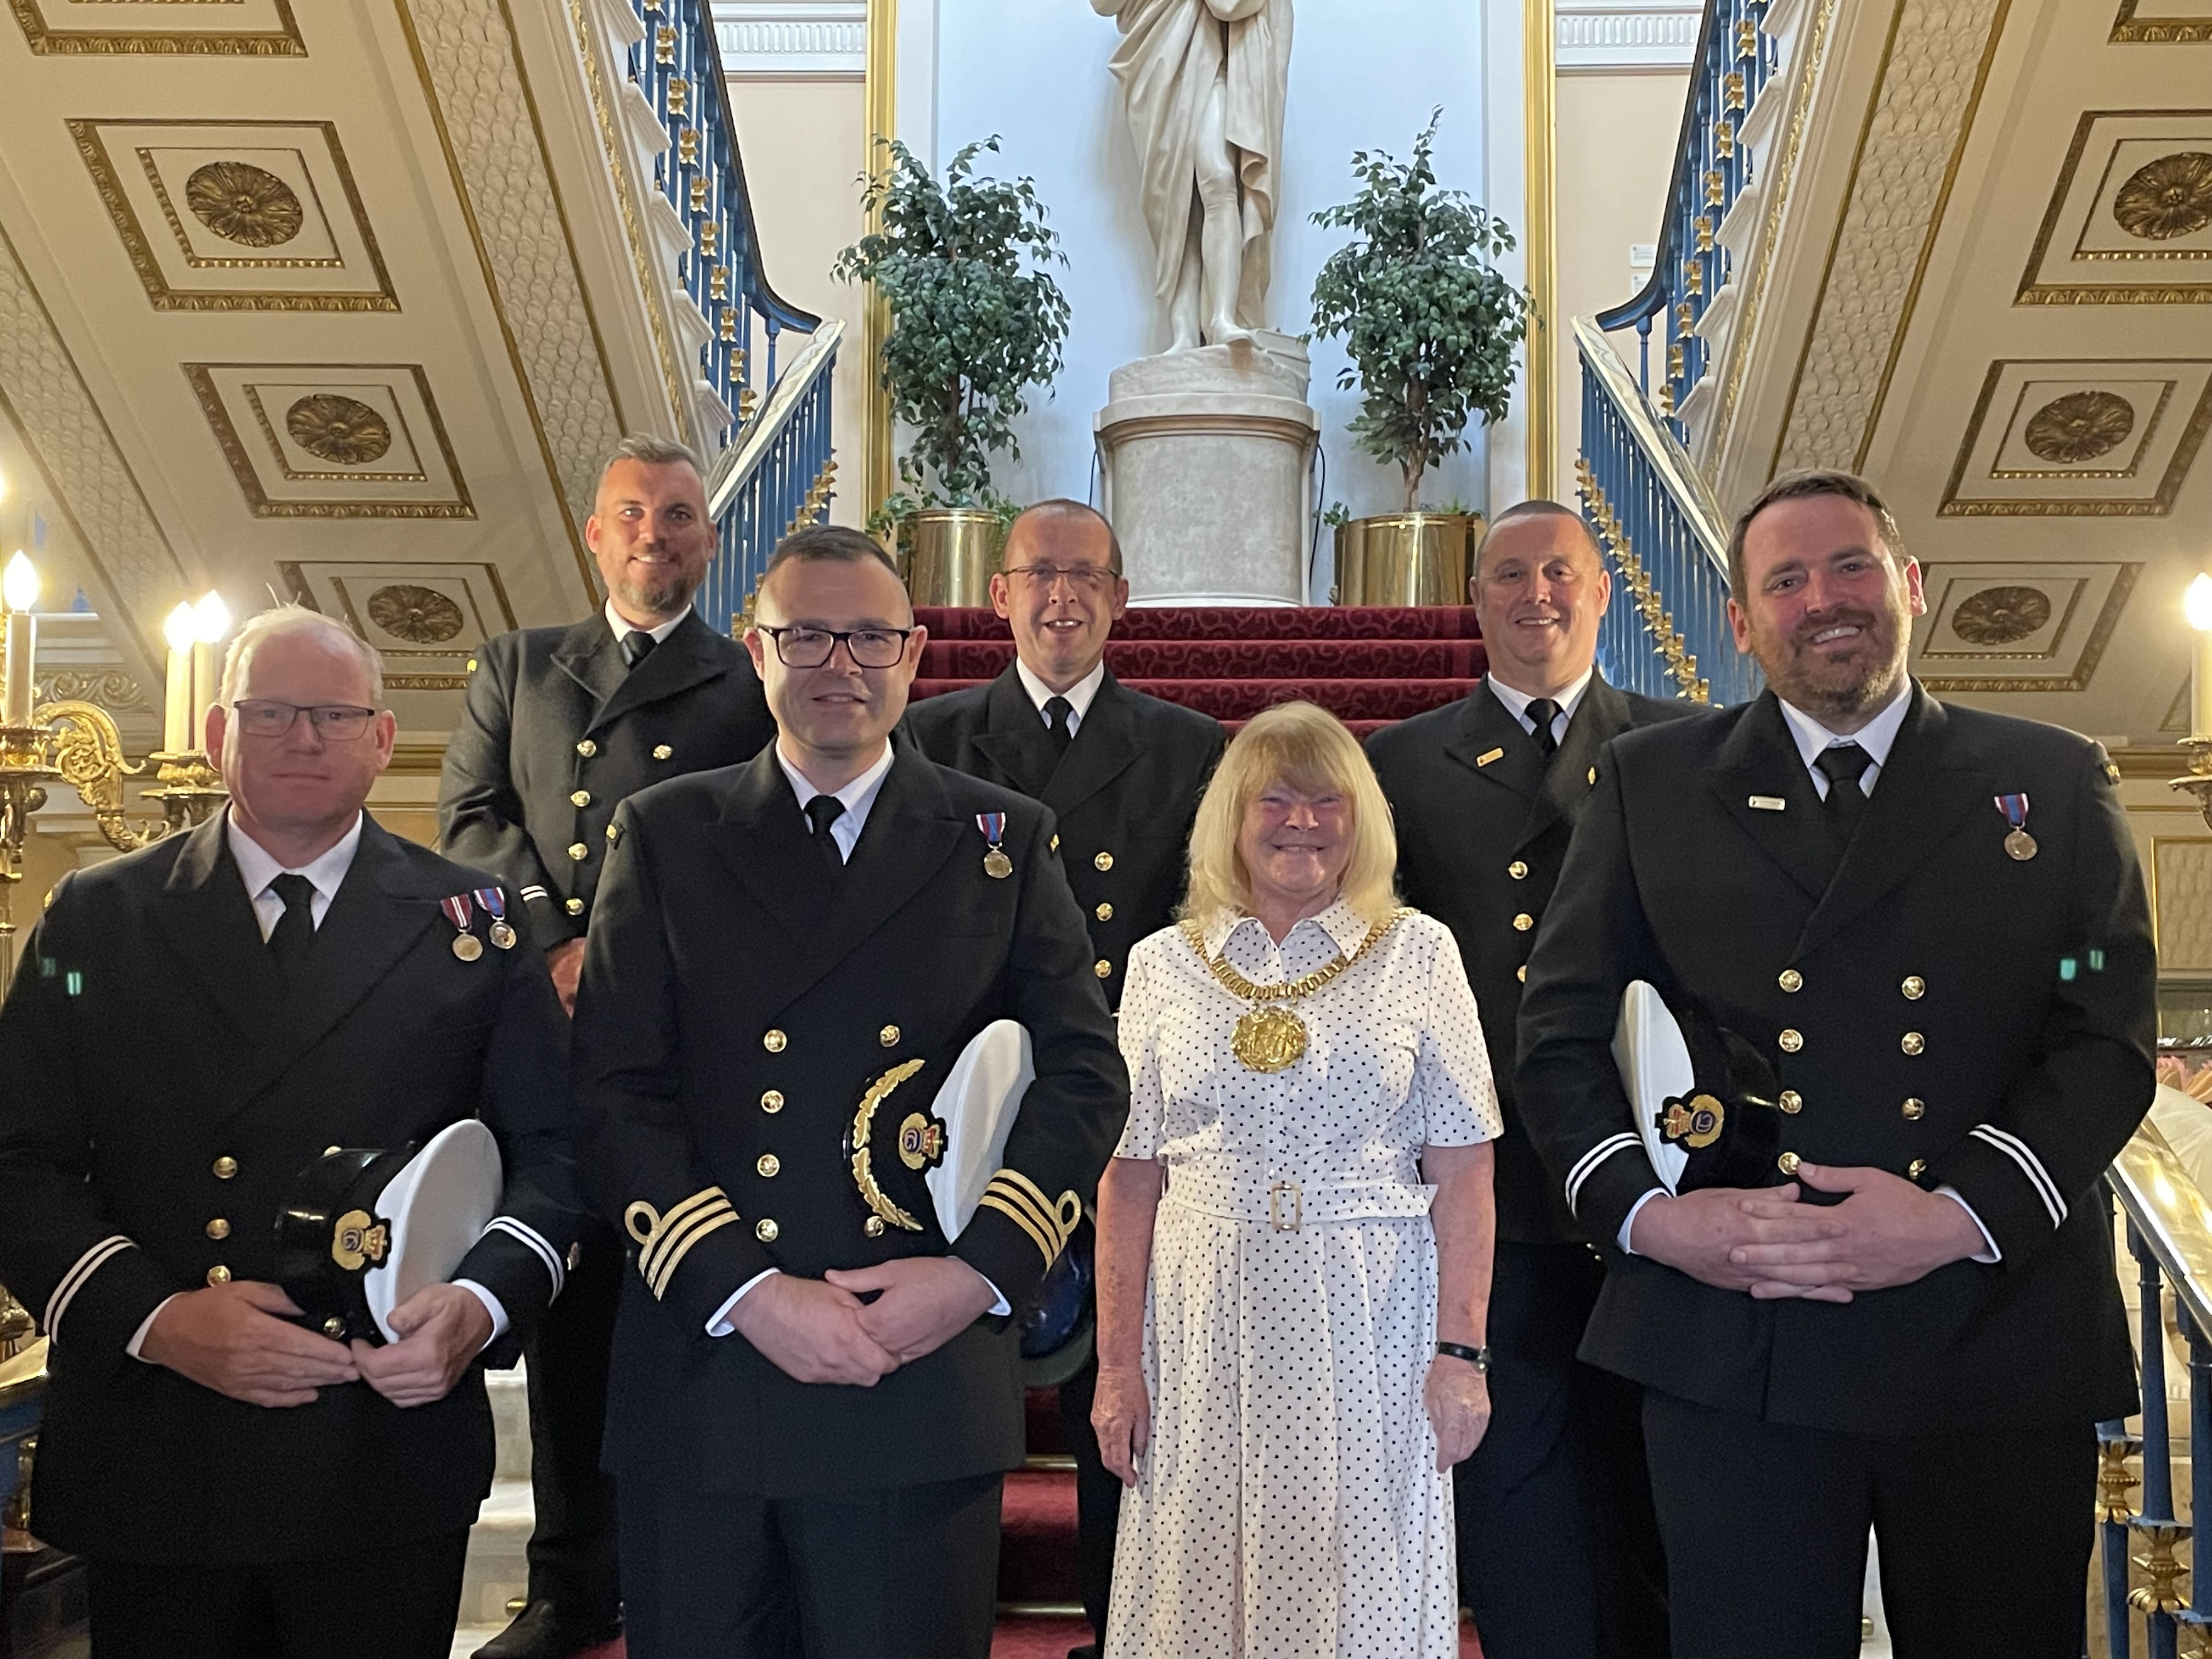 HM Coastguard officers invited to attend a special event for Emergency Services Day at Liverpool Town Hall alongside Lord Mayor Mary Rasmussen